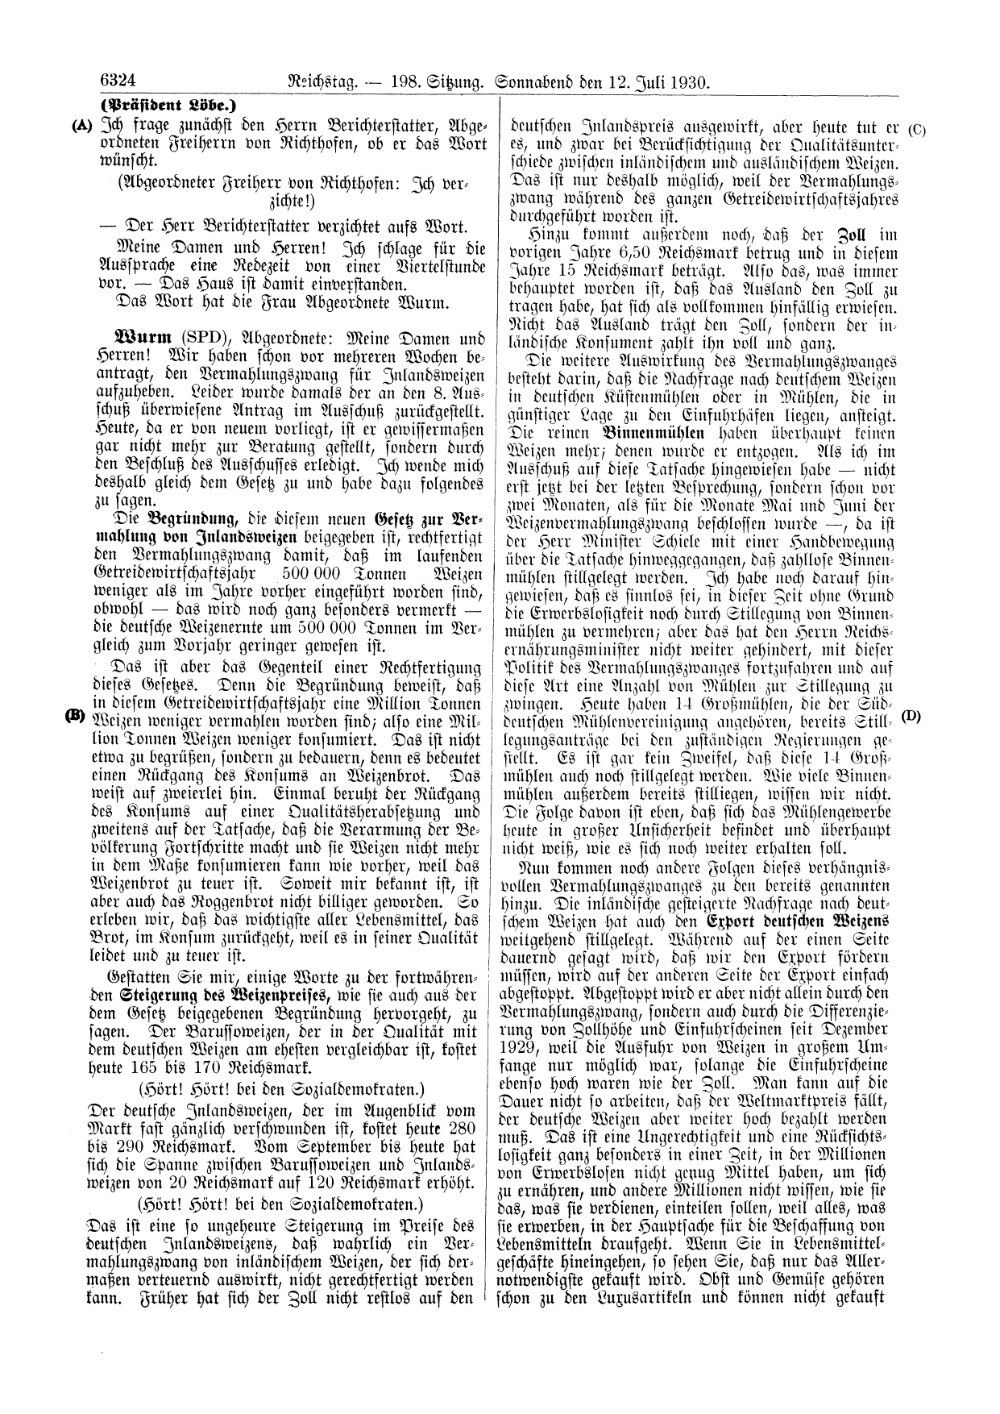 Scan of page 6324